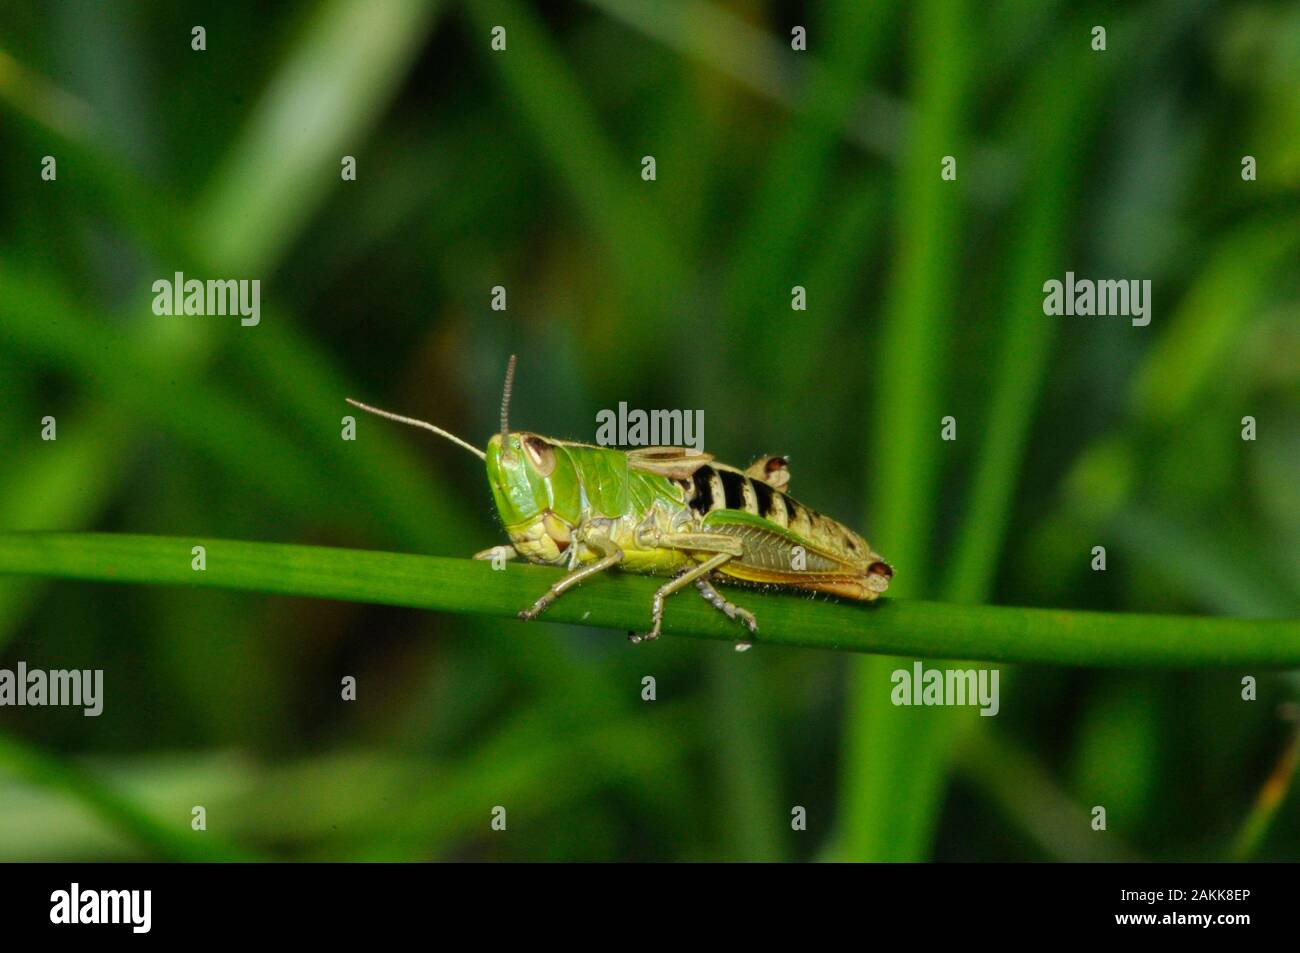 Meadow Grasshopper 'Chorthippus parallelus',flightless, short forewings,insect,Cley hill, Wiltshire.UK Stock Photo